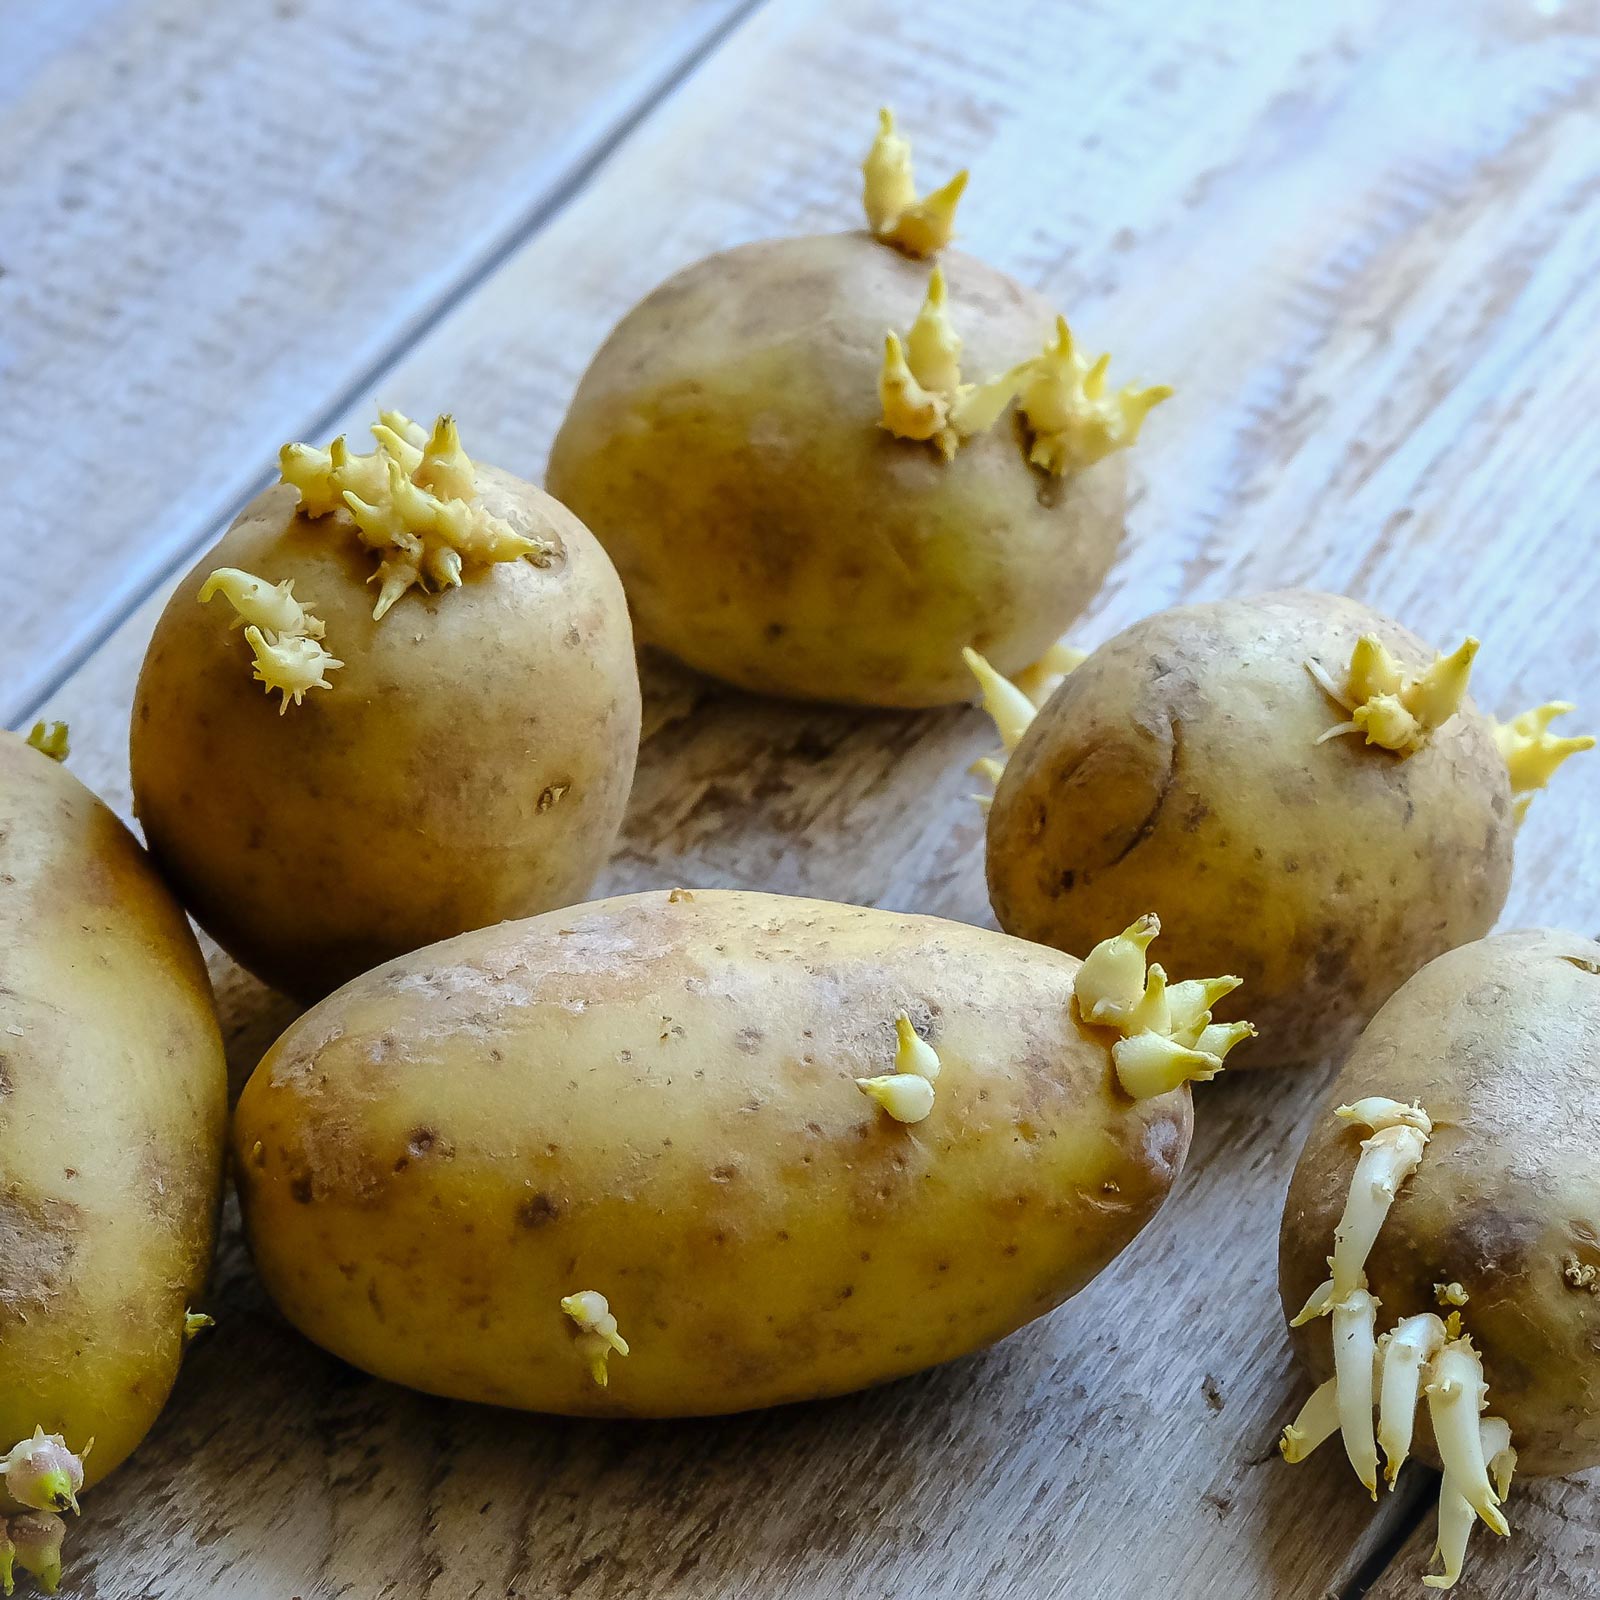 https://goodly.ca/wp-content/uploads/2020/11/help-us-sprouted-potatoes.jpg